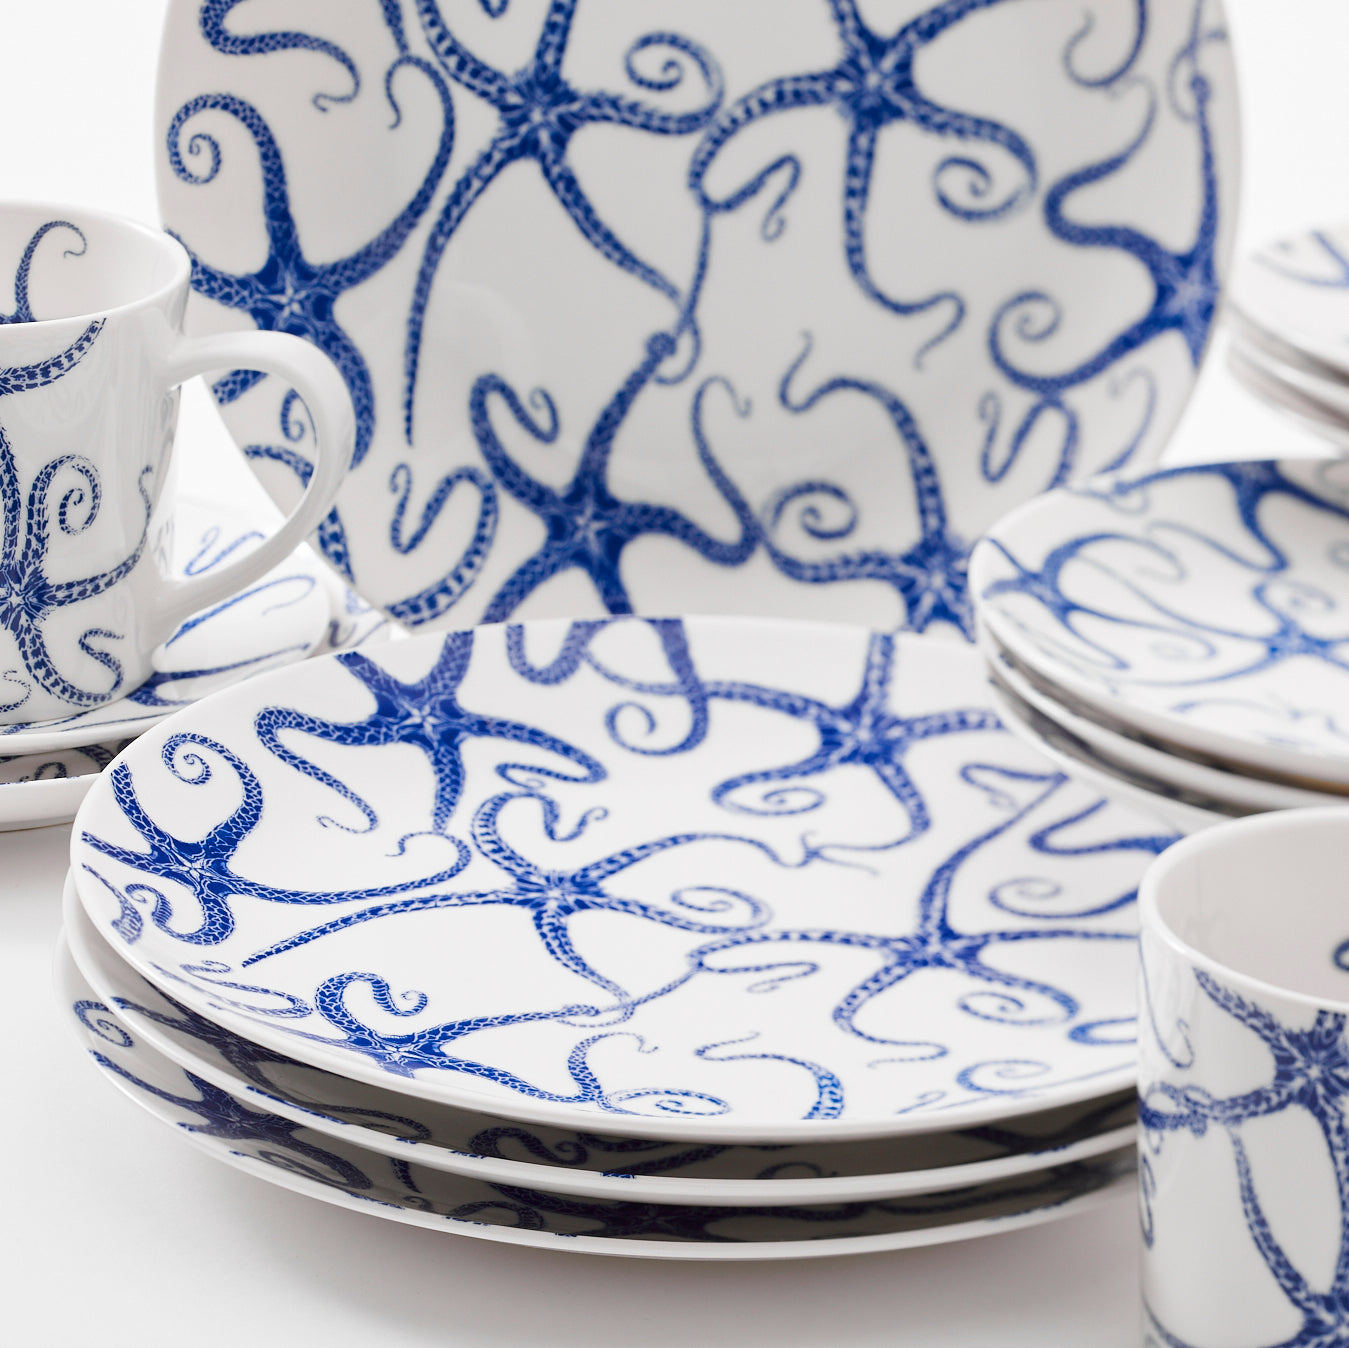 Starfish pattern 16 piece dinnerware set in blue and white porcelain from Caskata